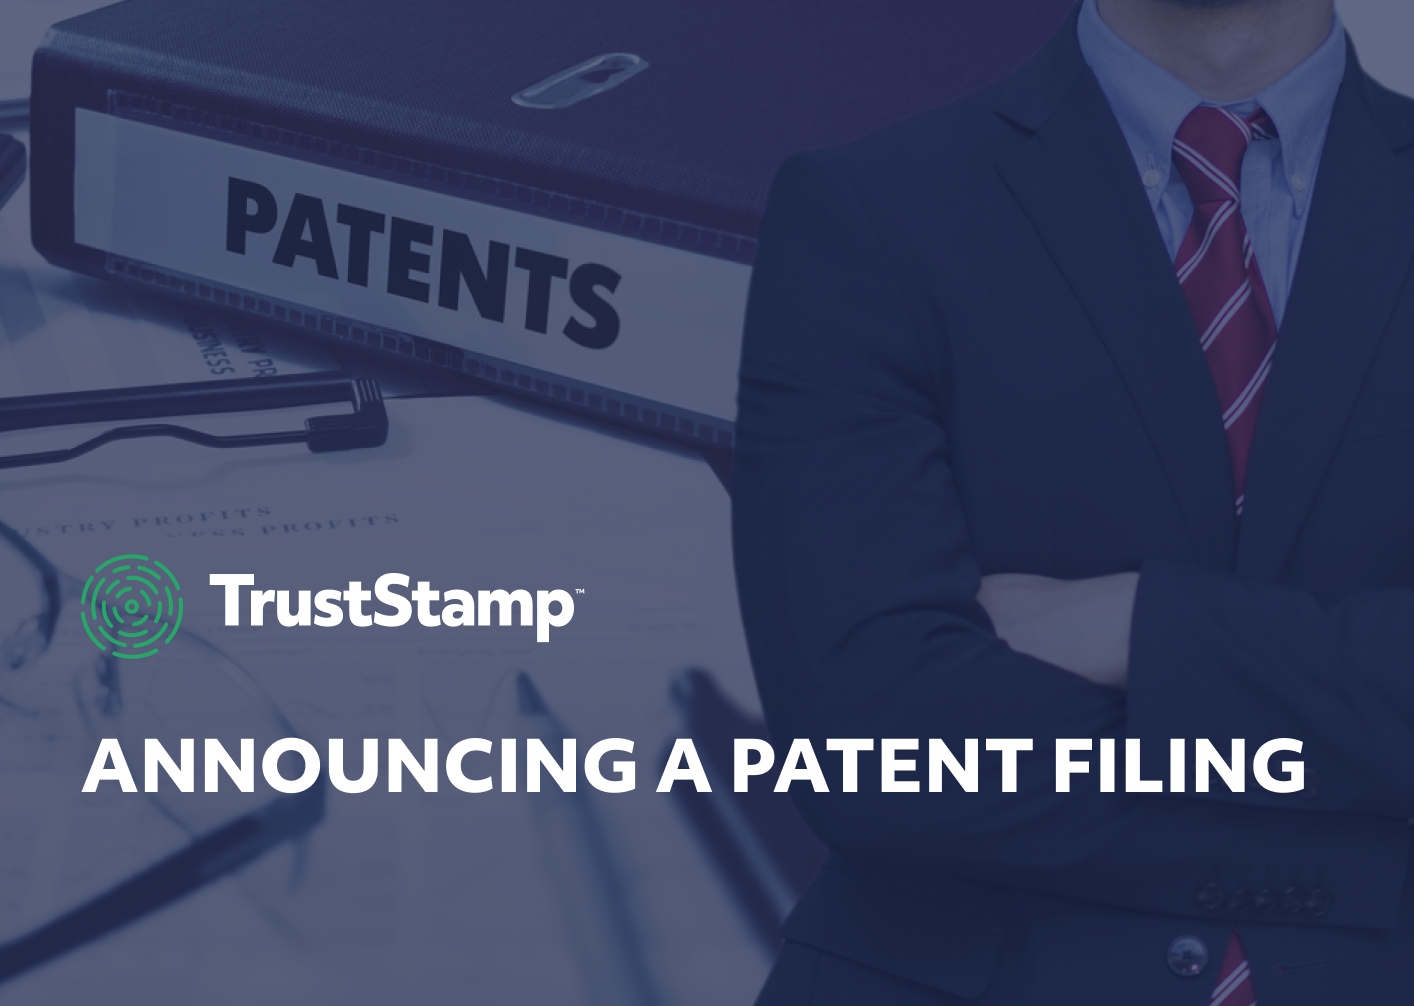 trust-stamp-announces-a-patent-filing